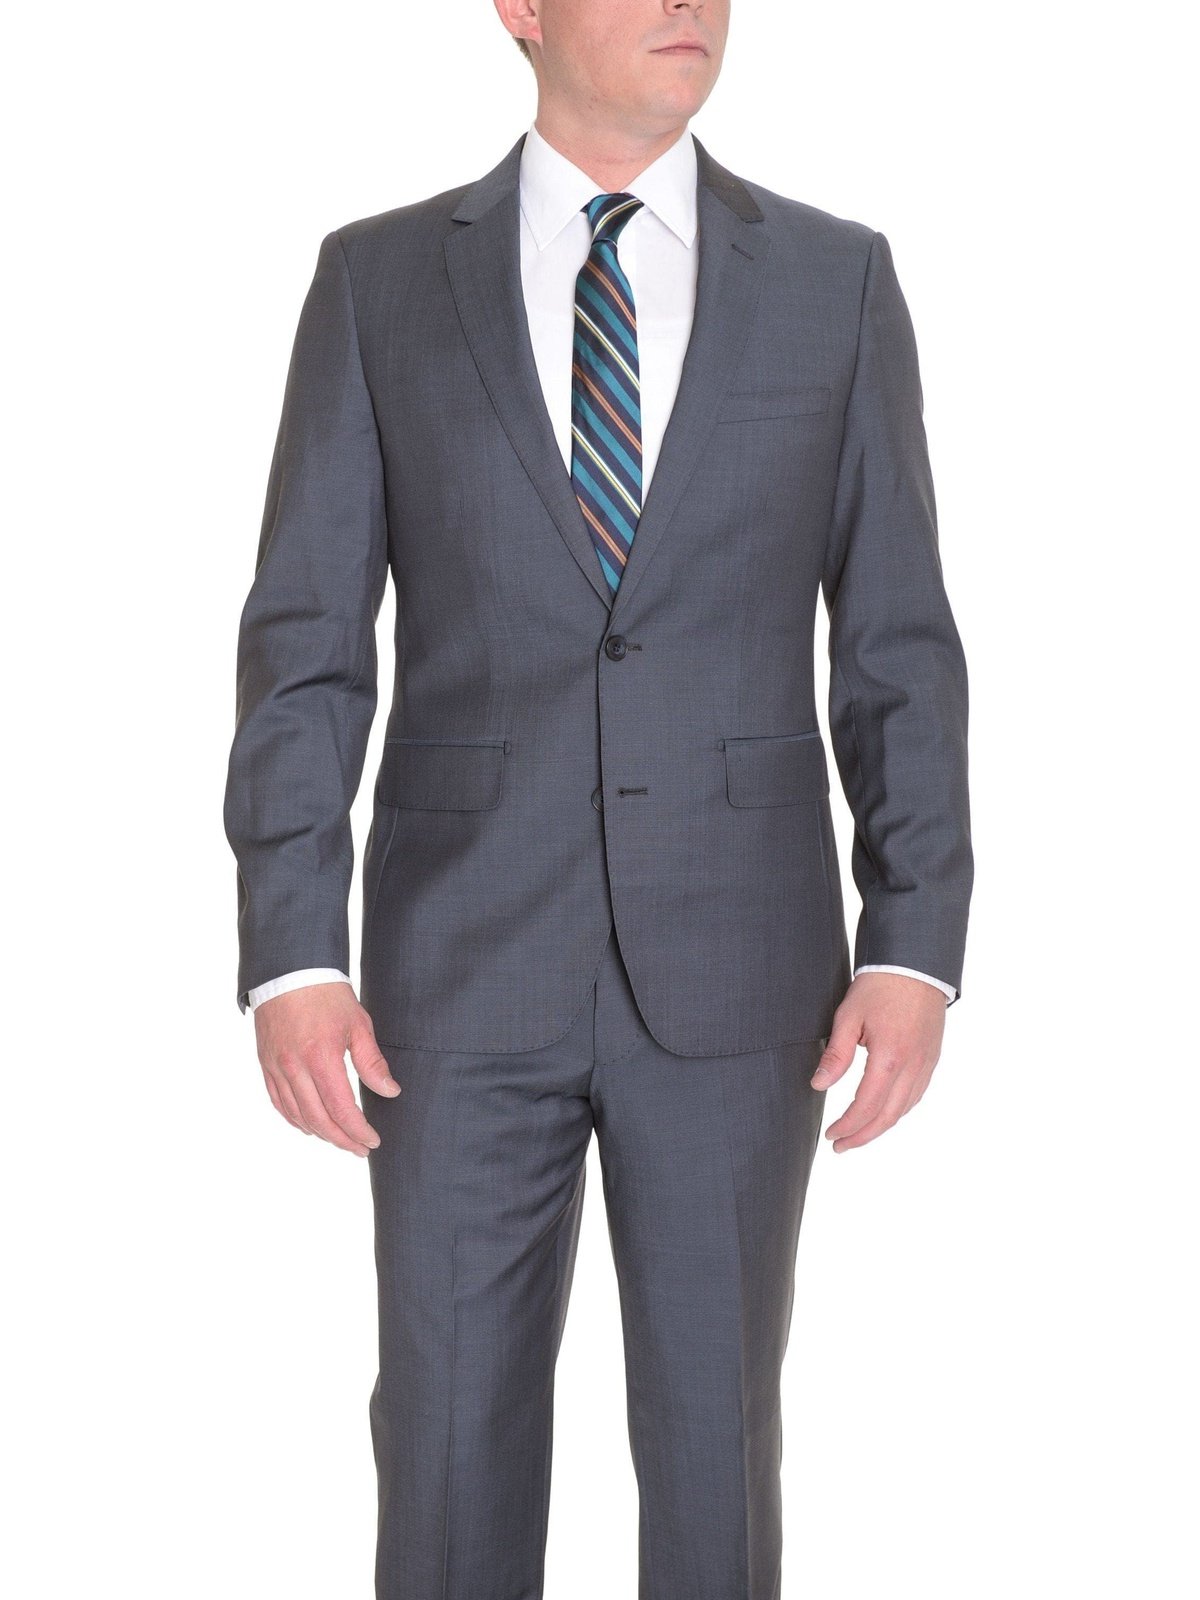 London Fog TWO PIECE SUITS Extra Slim Fit Solid Charcoal Heather Gray Two Button Wool Suit